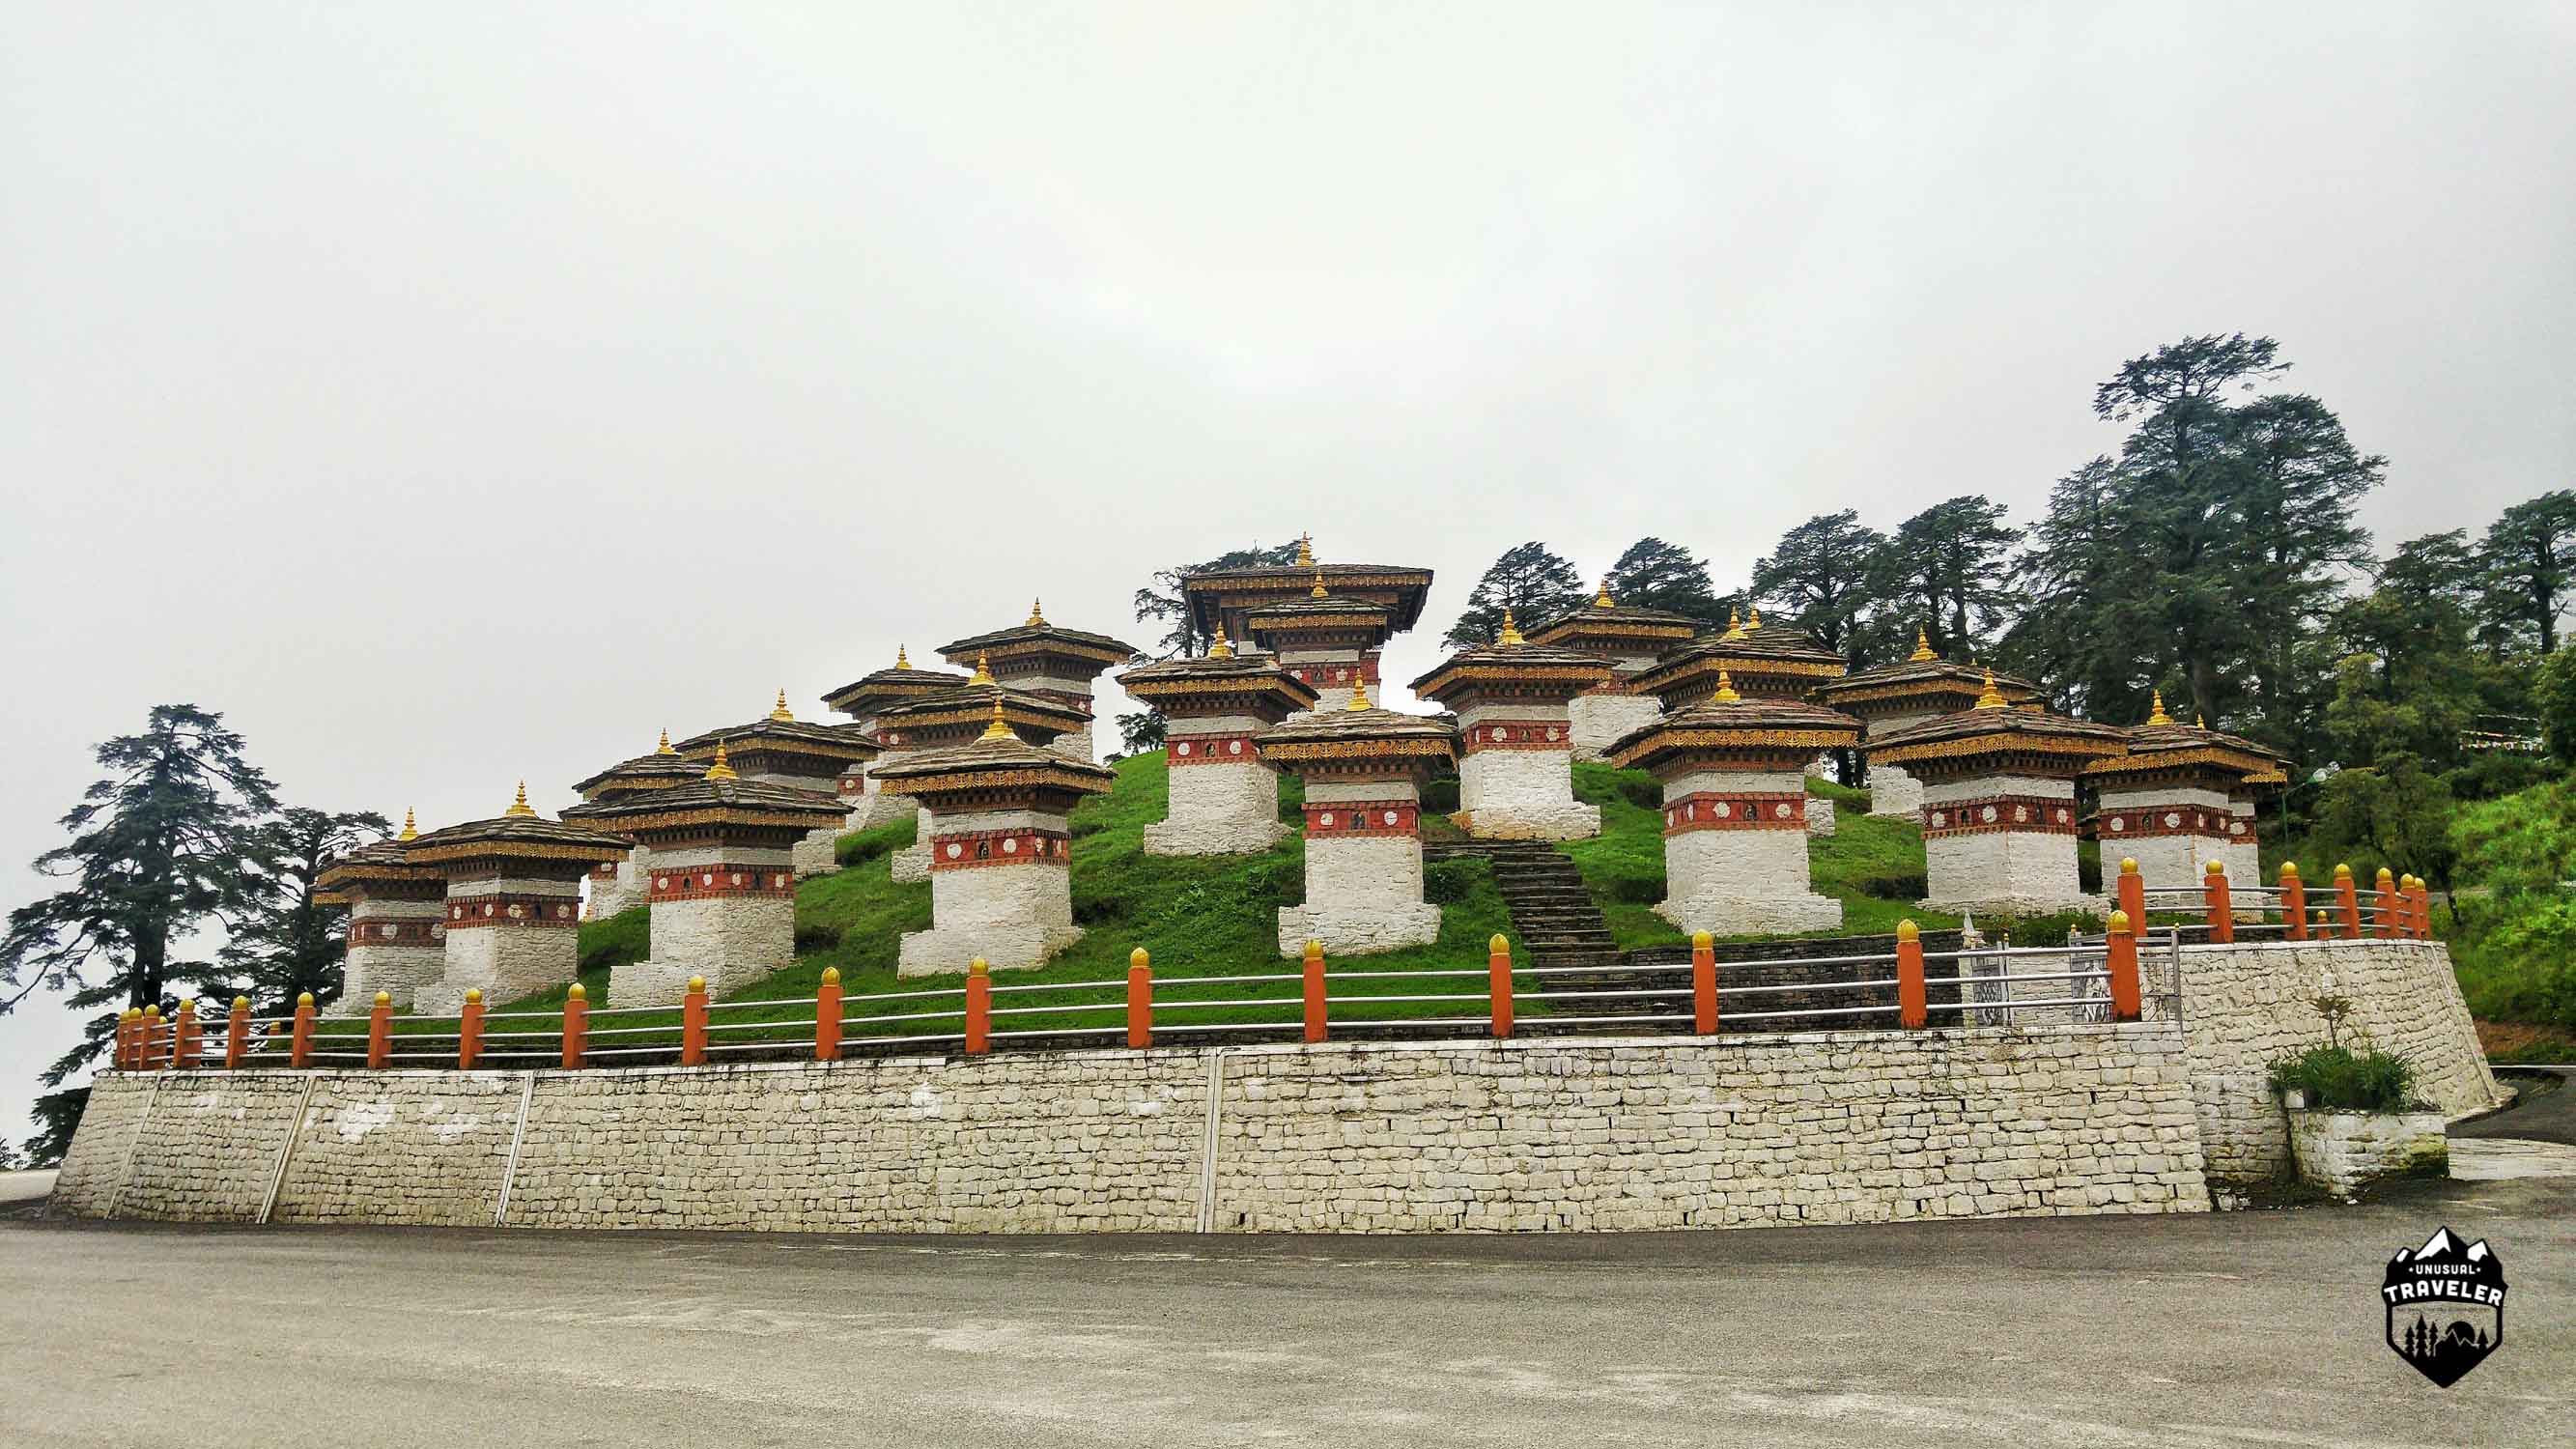 Some of the 108 stupas called chortens in English